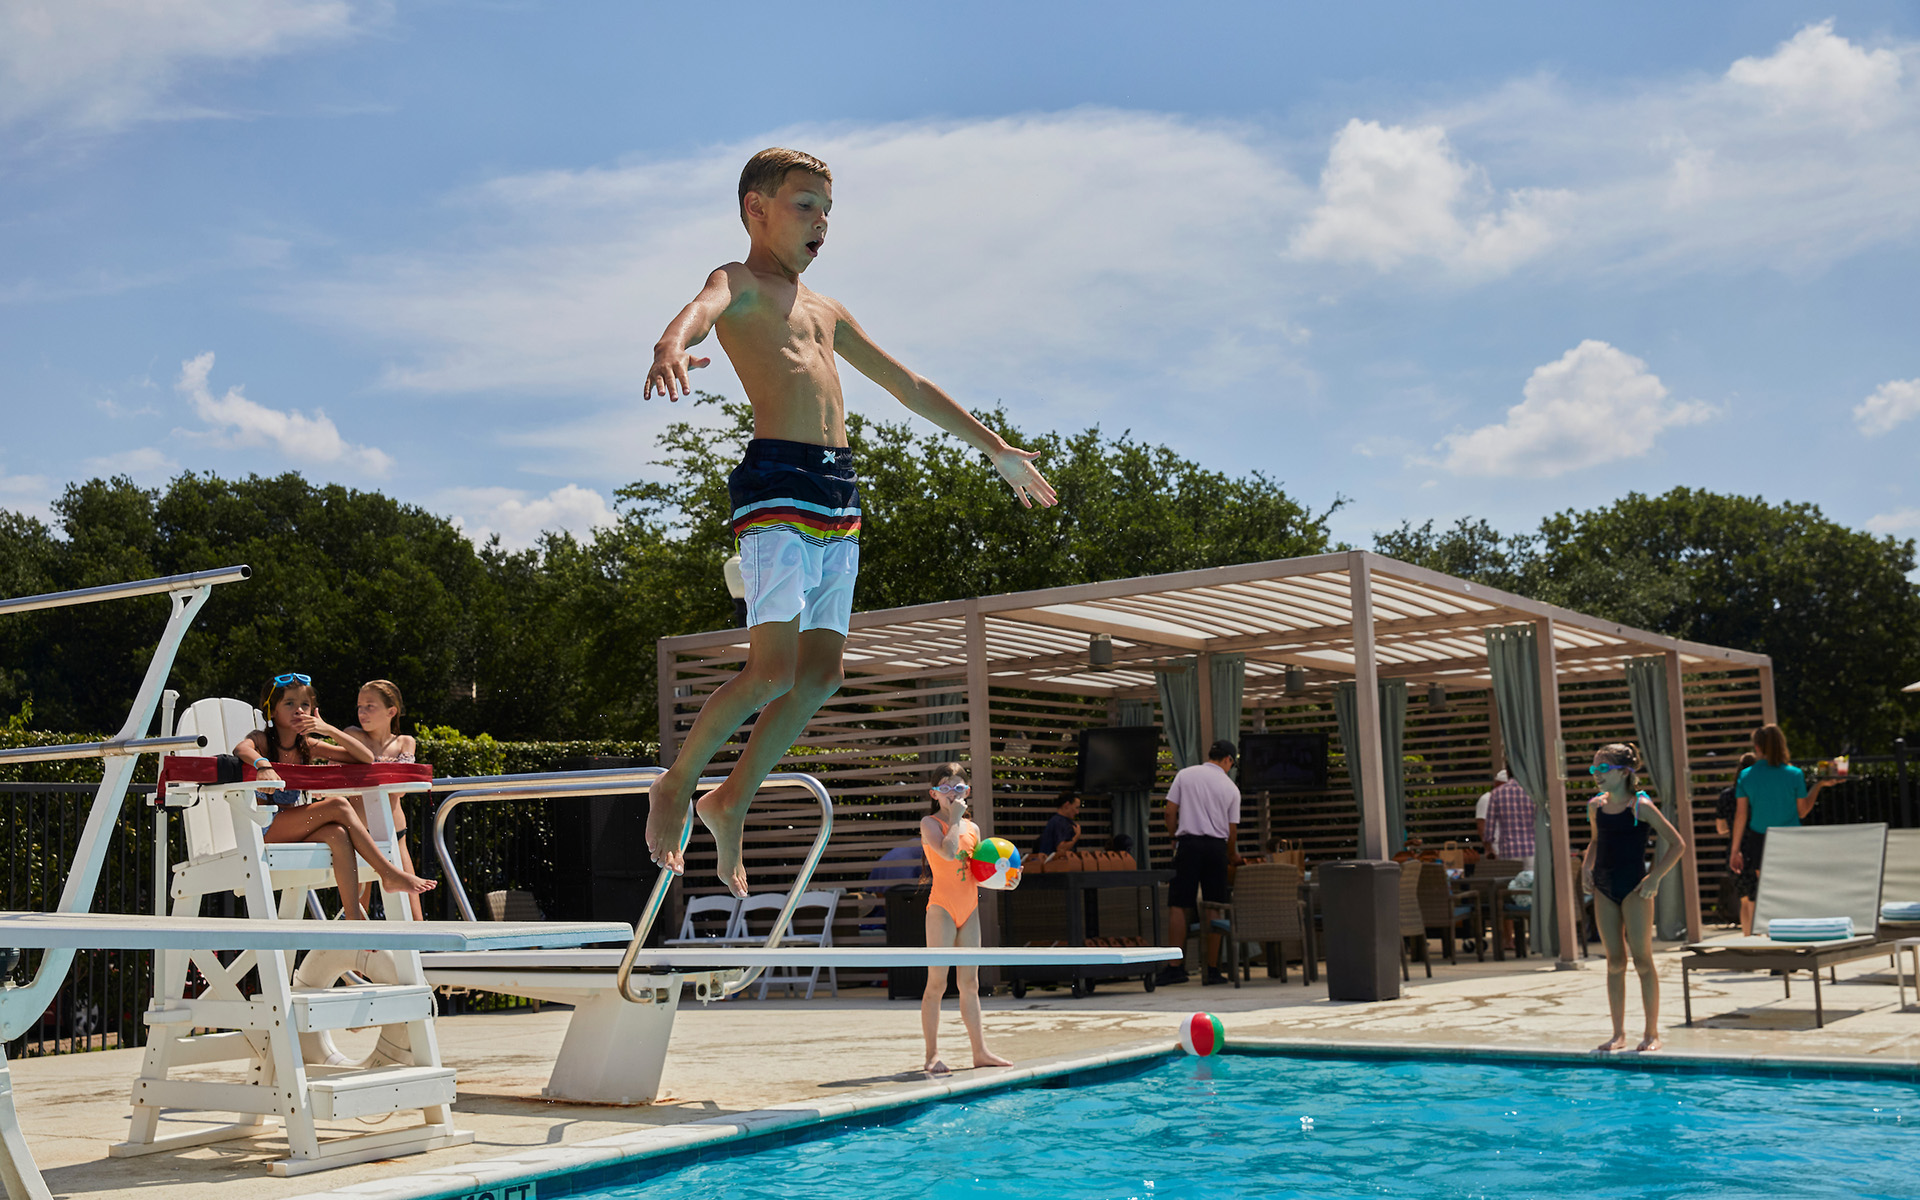 Providence outdoor pools reopen for the summer